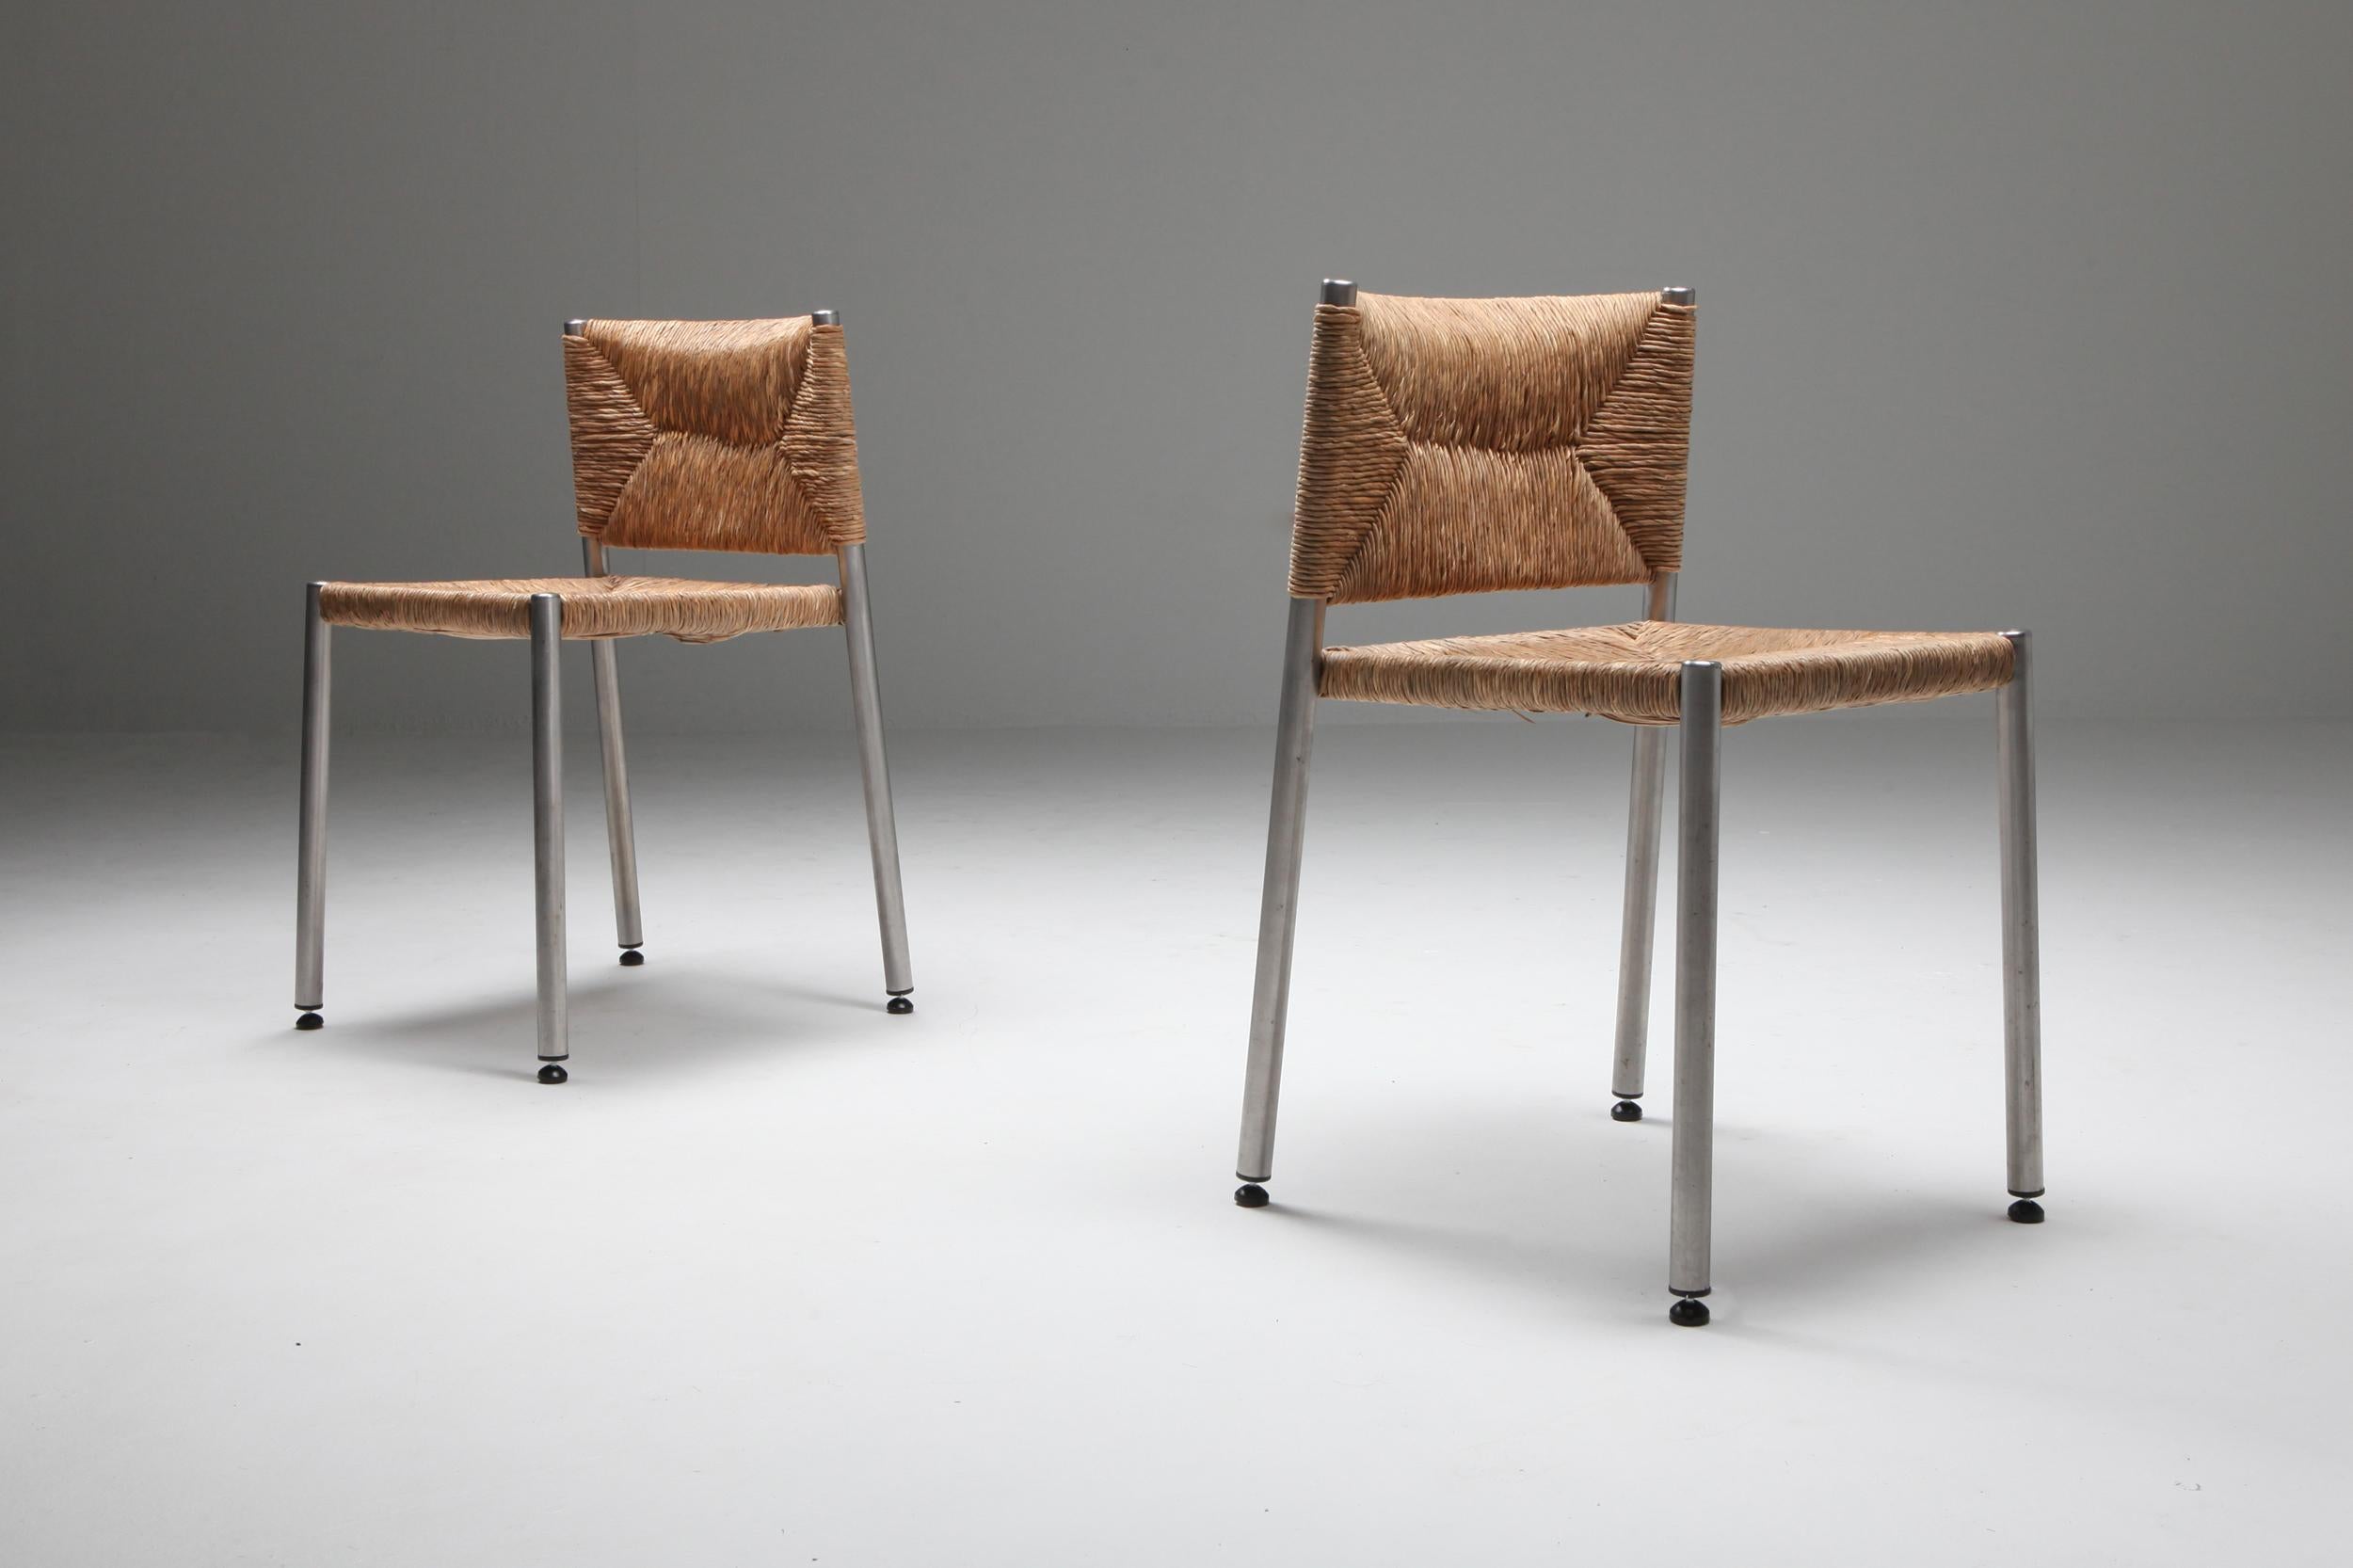 Post-Modern Contemporary Rustic Modern Chairs in Seagrass and Aluminum